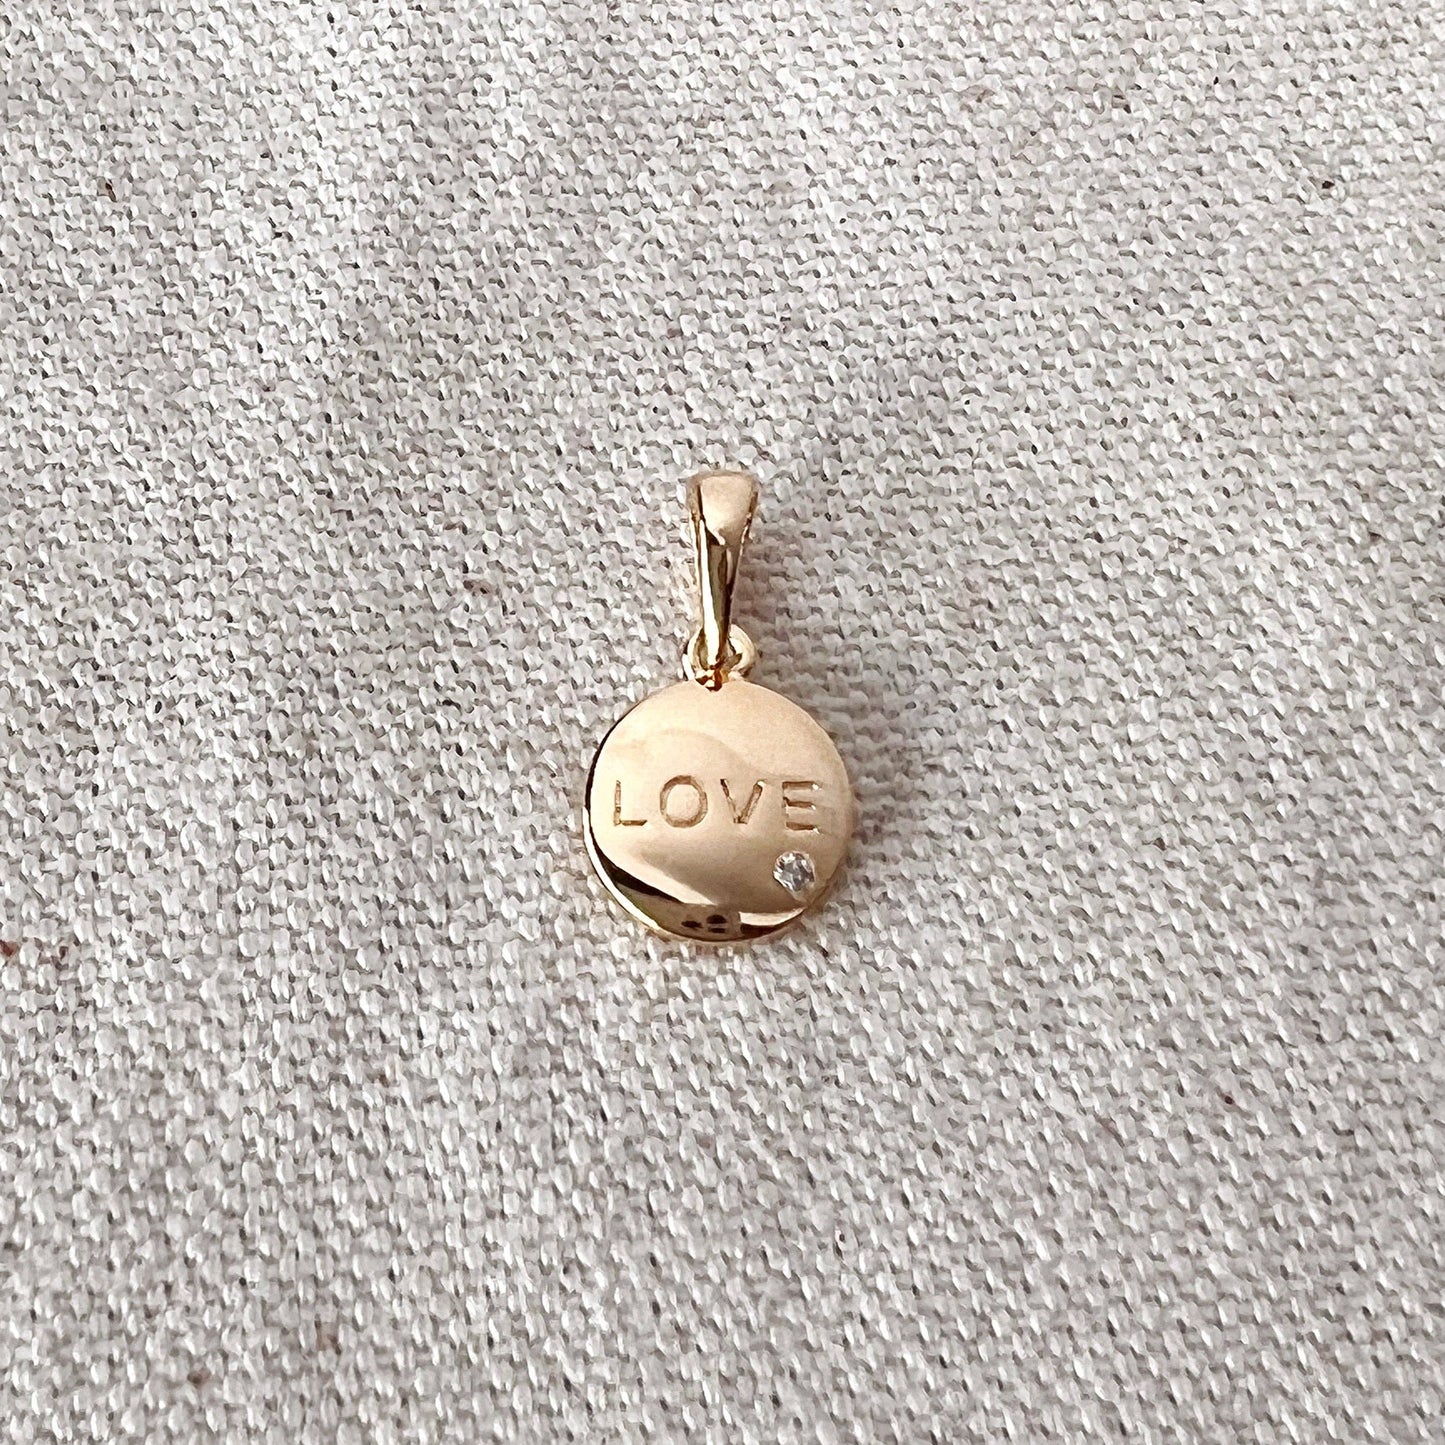 18k Gold Filled L.O.V.E. And Shiny Cubic Zirconia Detail Pendant